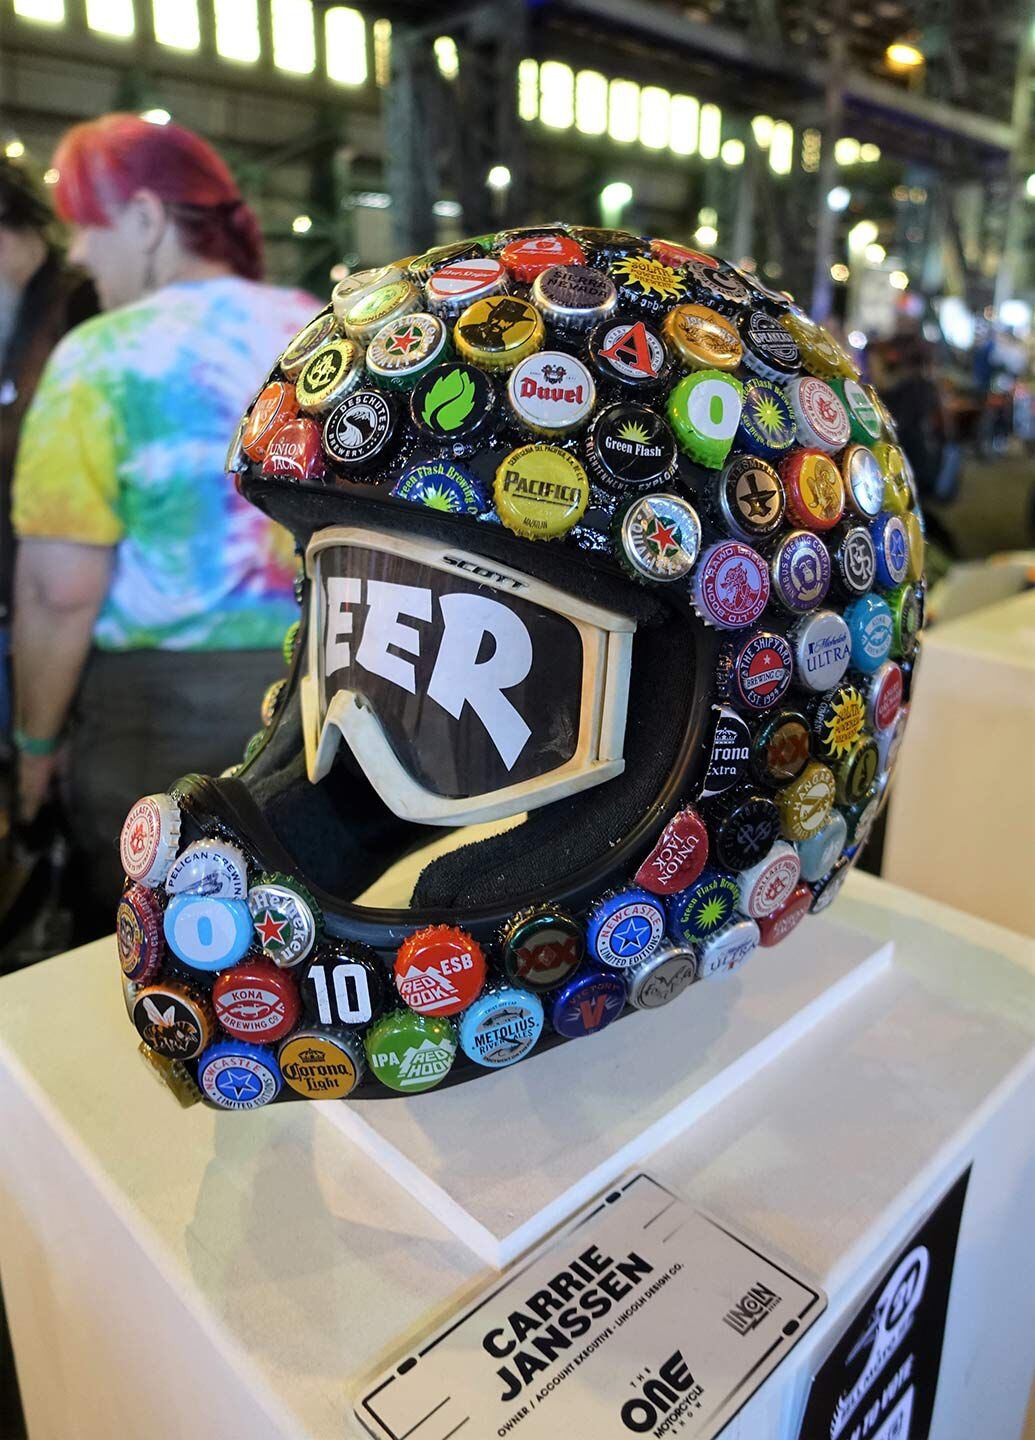 We can always count on some out-of-the box lid designs at the annual 21 Helmets art presentation, a show-within-the-show put on by Bell Helmets.